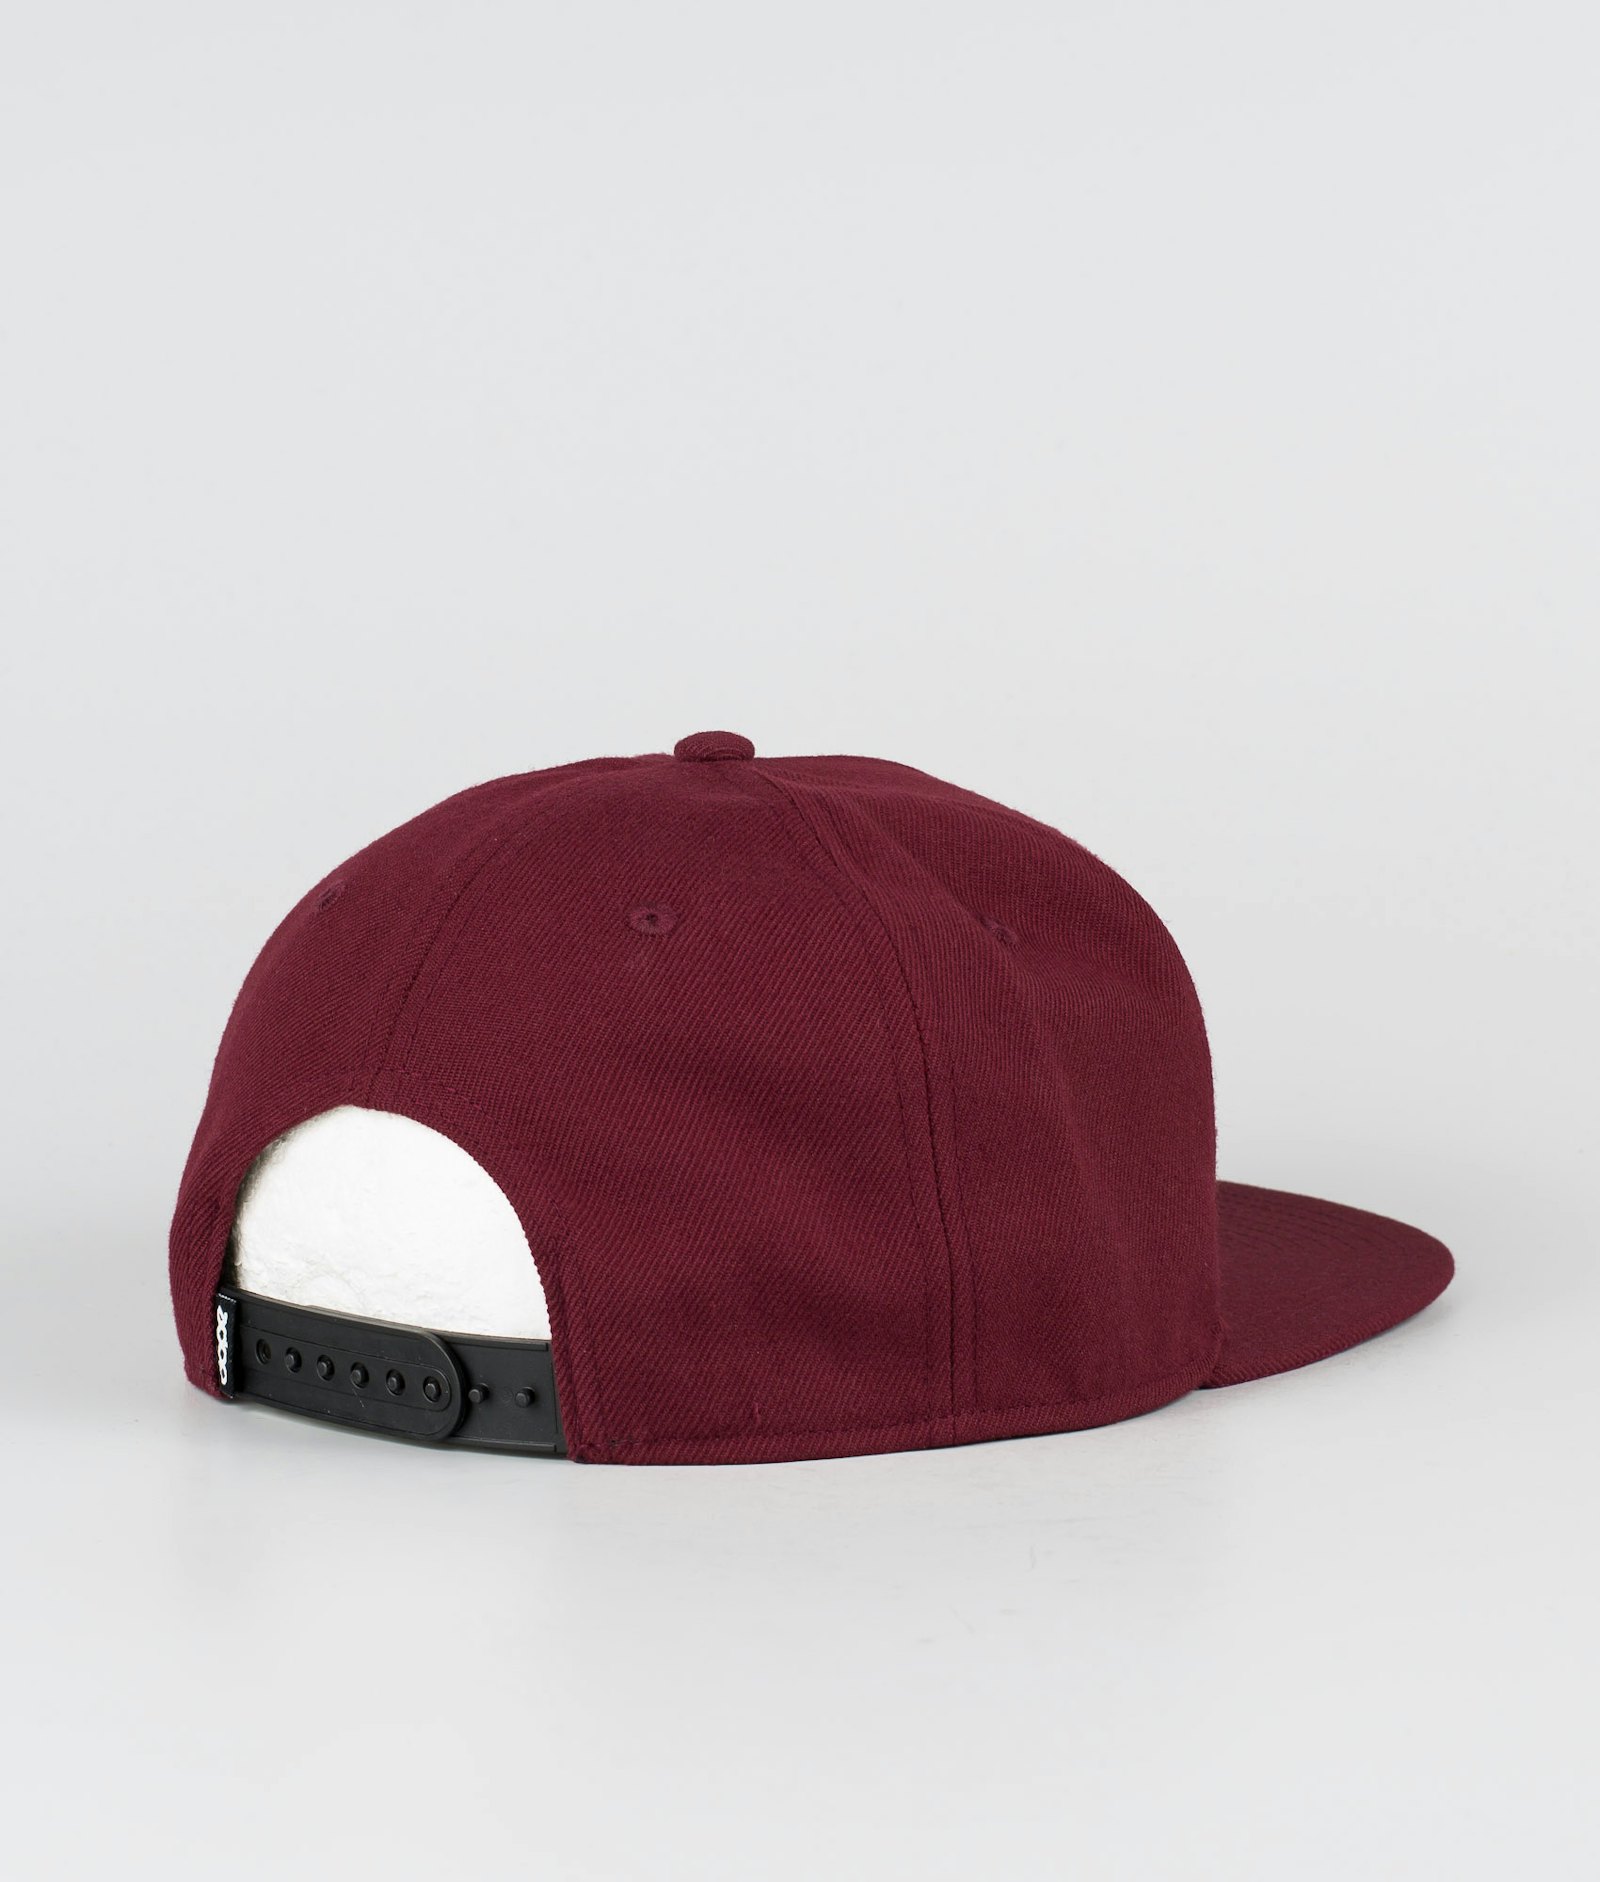 Dope Patched Casquette Burgundy